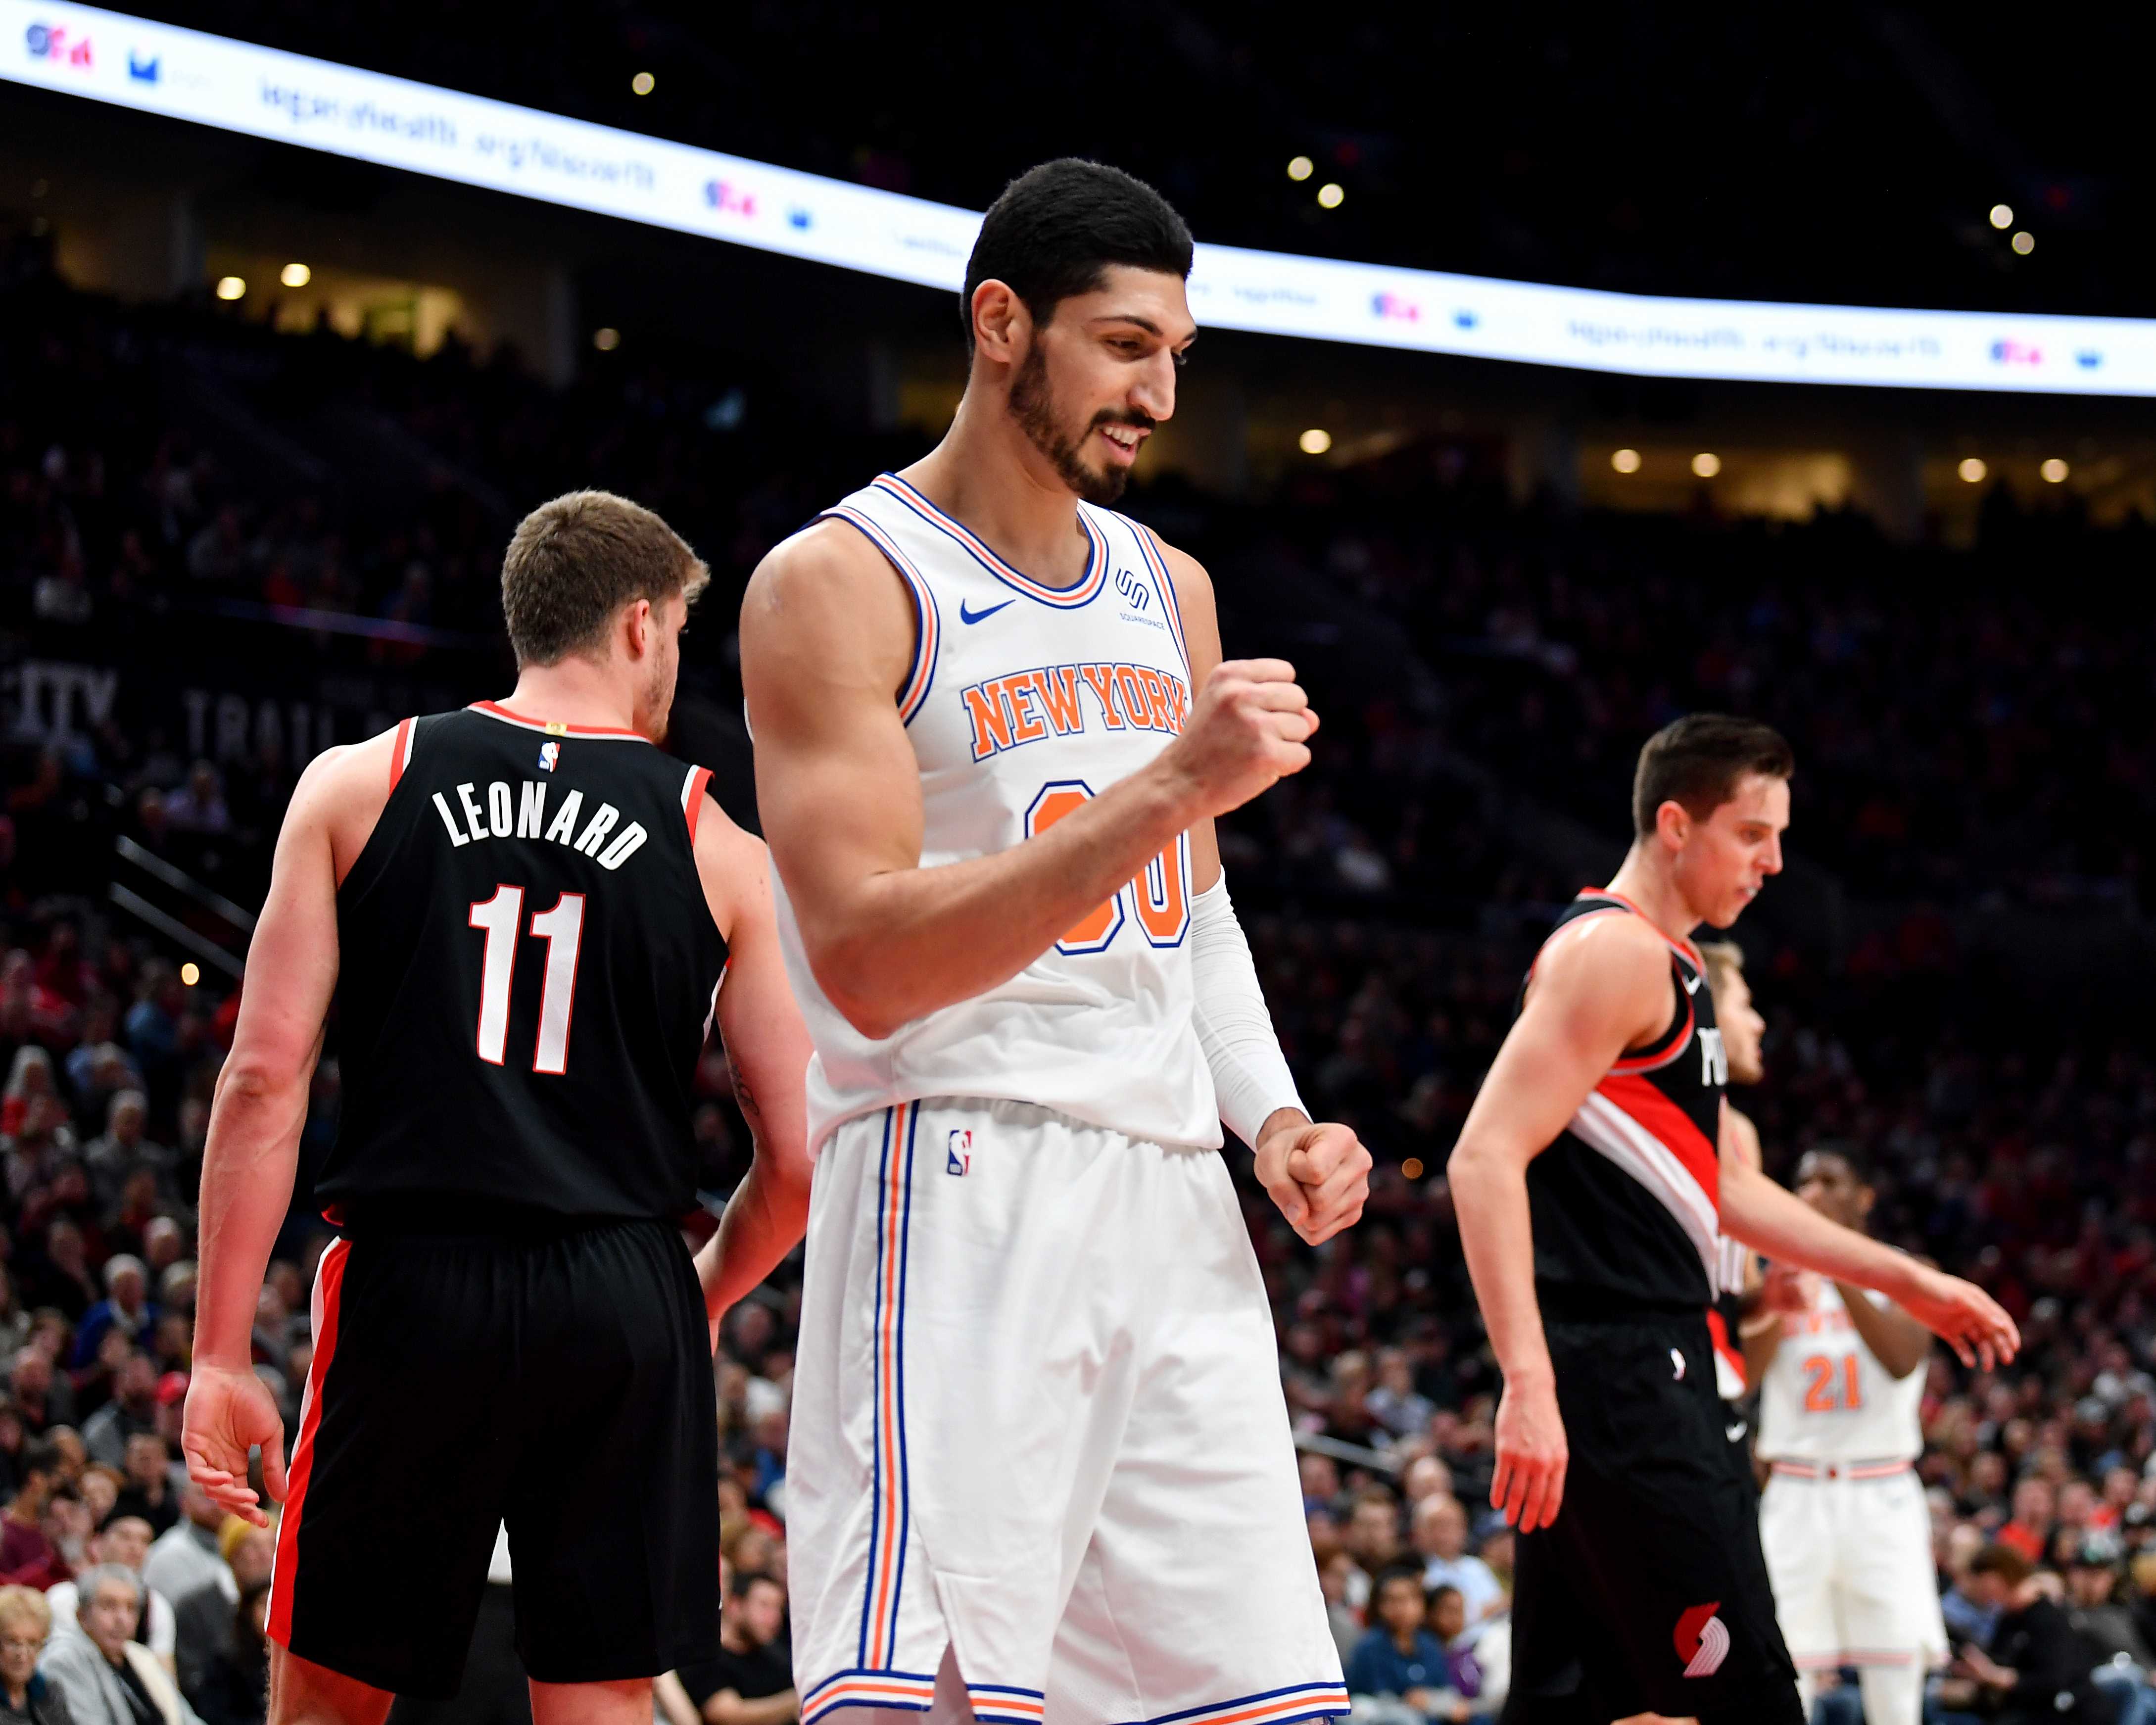 Enes Kanter #00 of the New York Knicks at the Moda Center on January 07, 2019 in Portland, Oregon. (Alika Jenner&mdash;Getty Images)